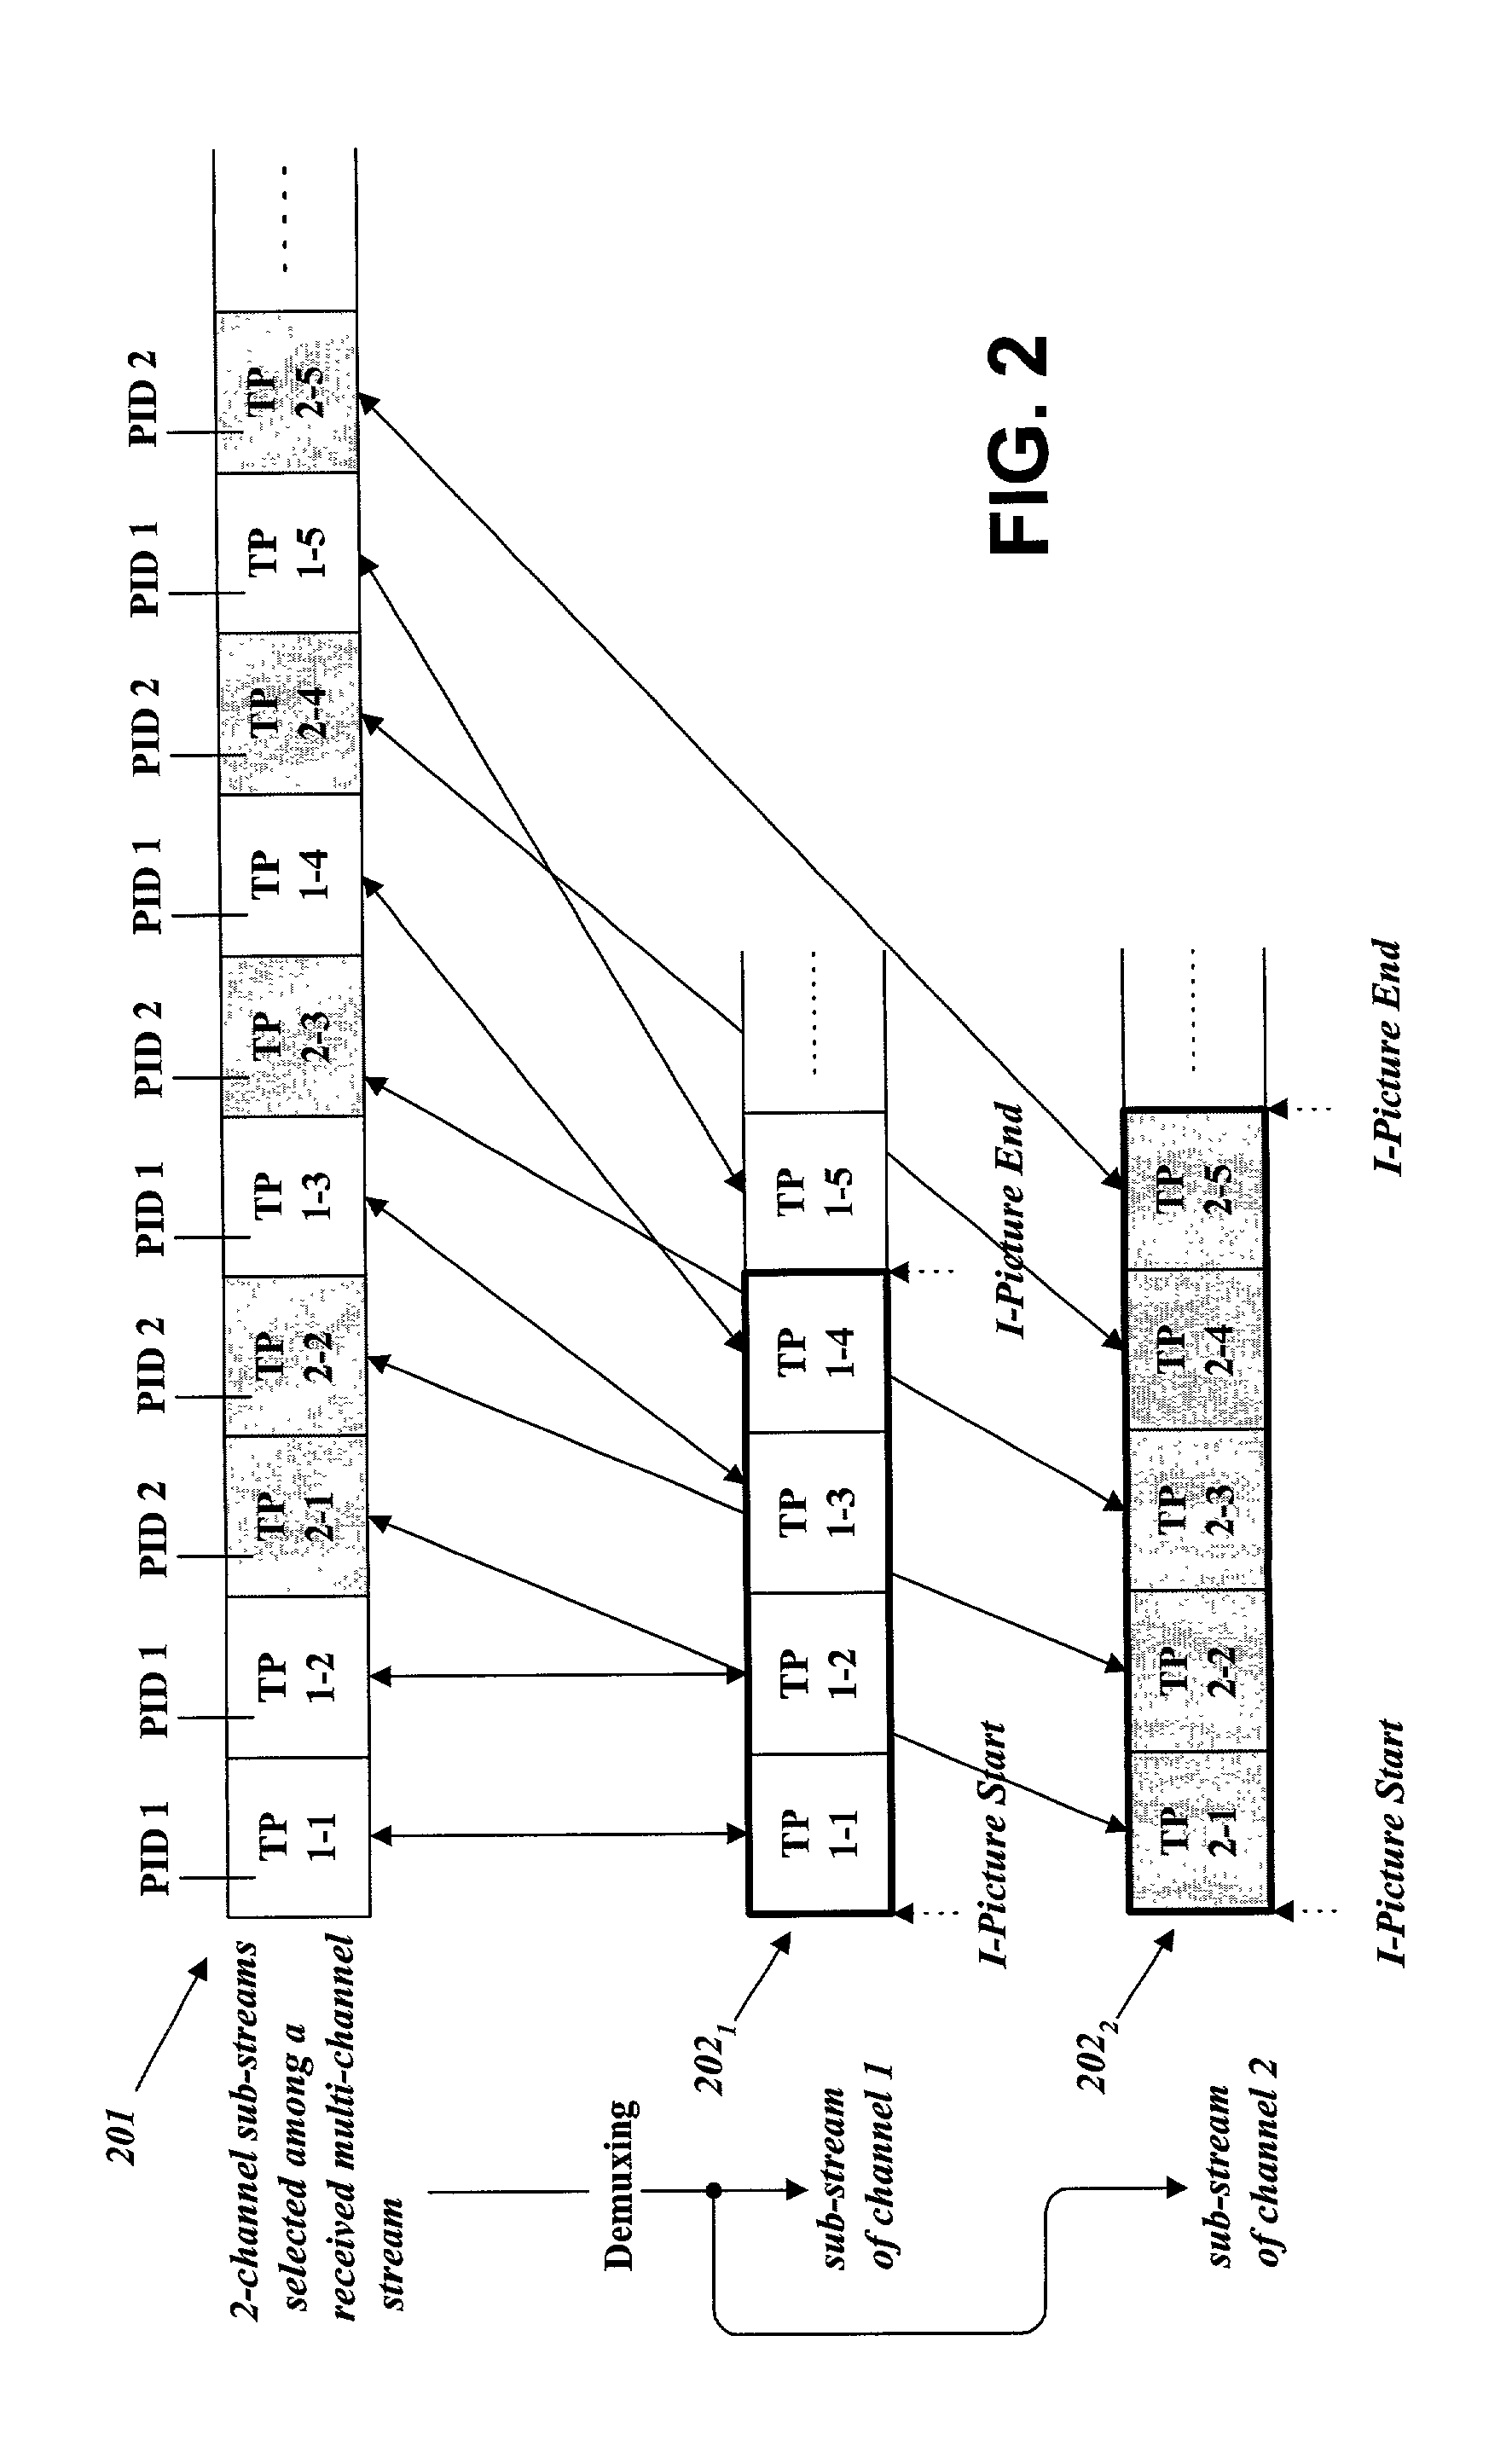 Method and apparatus of recording a multi-channel stream, and a recording medium containing a multi-channel stream recorded by said method